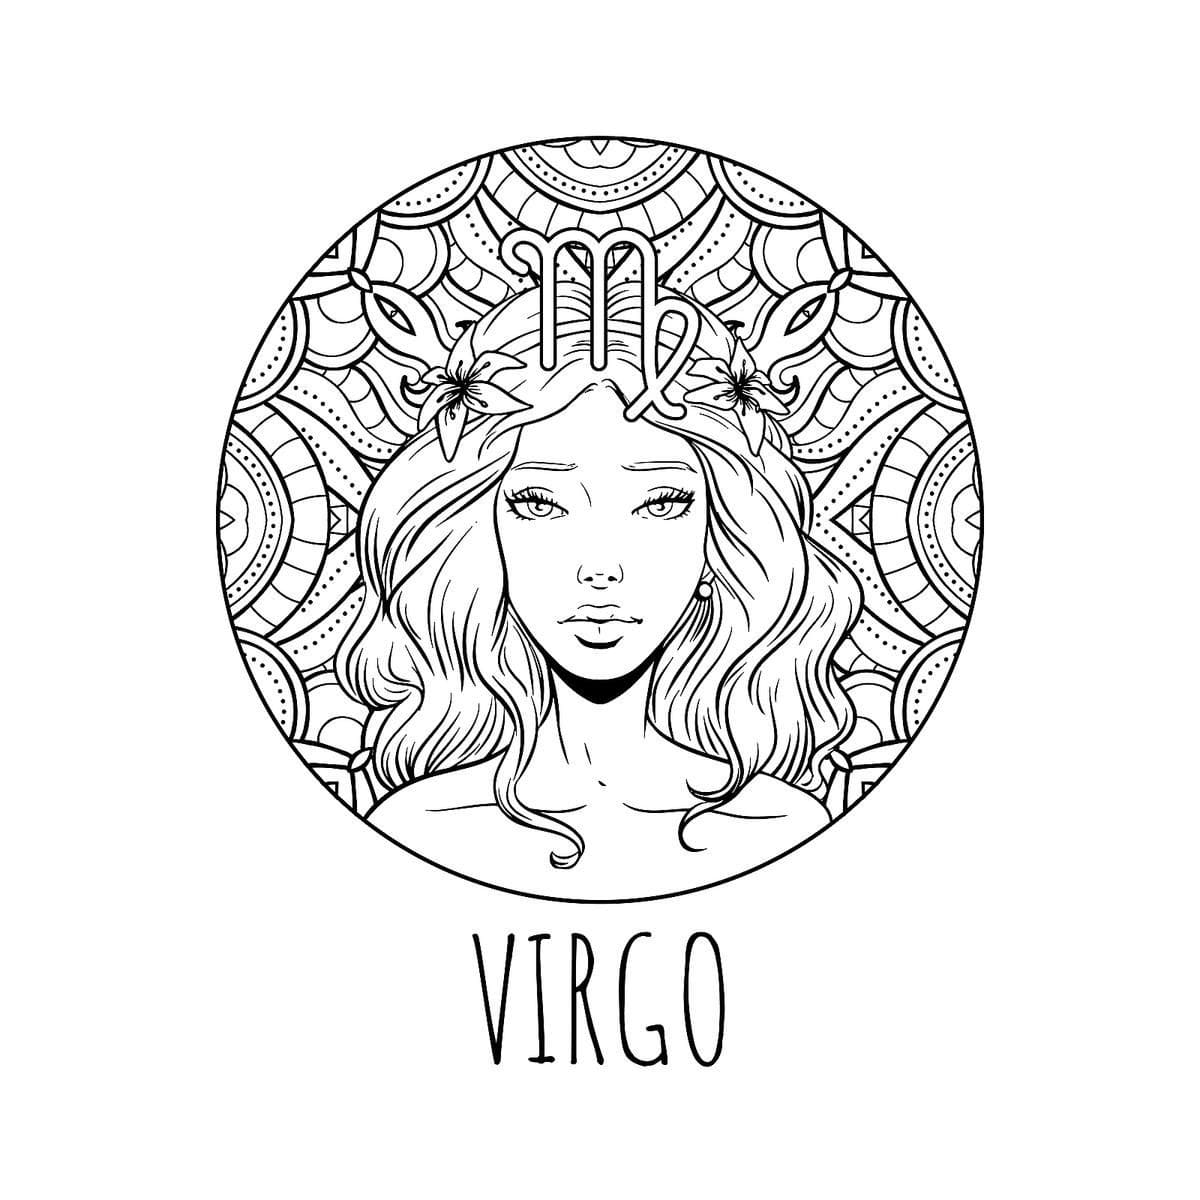 Free Virgo Zodiac Sign coloring page - Download, Print or Color Online ...